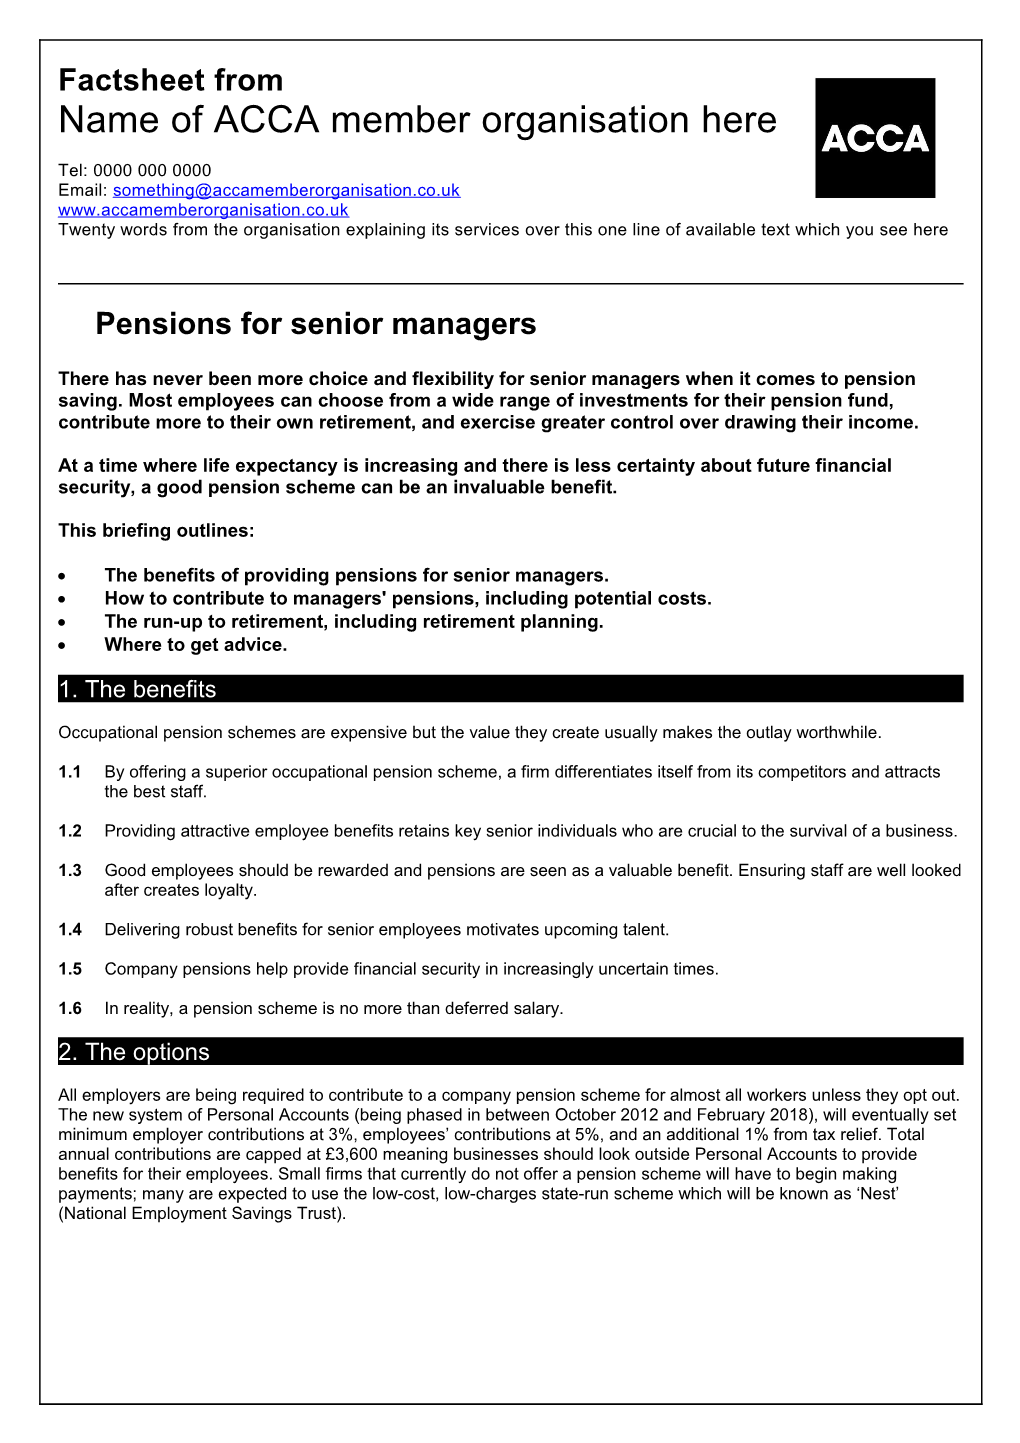 Pensions for Senior Managers